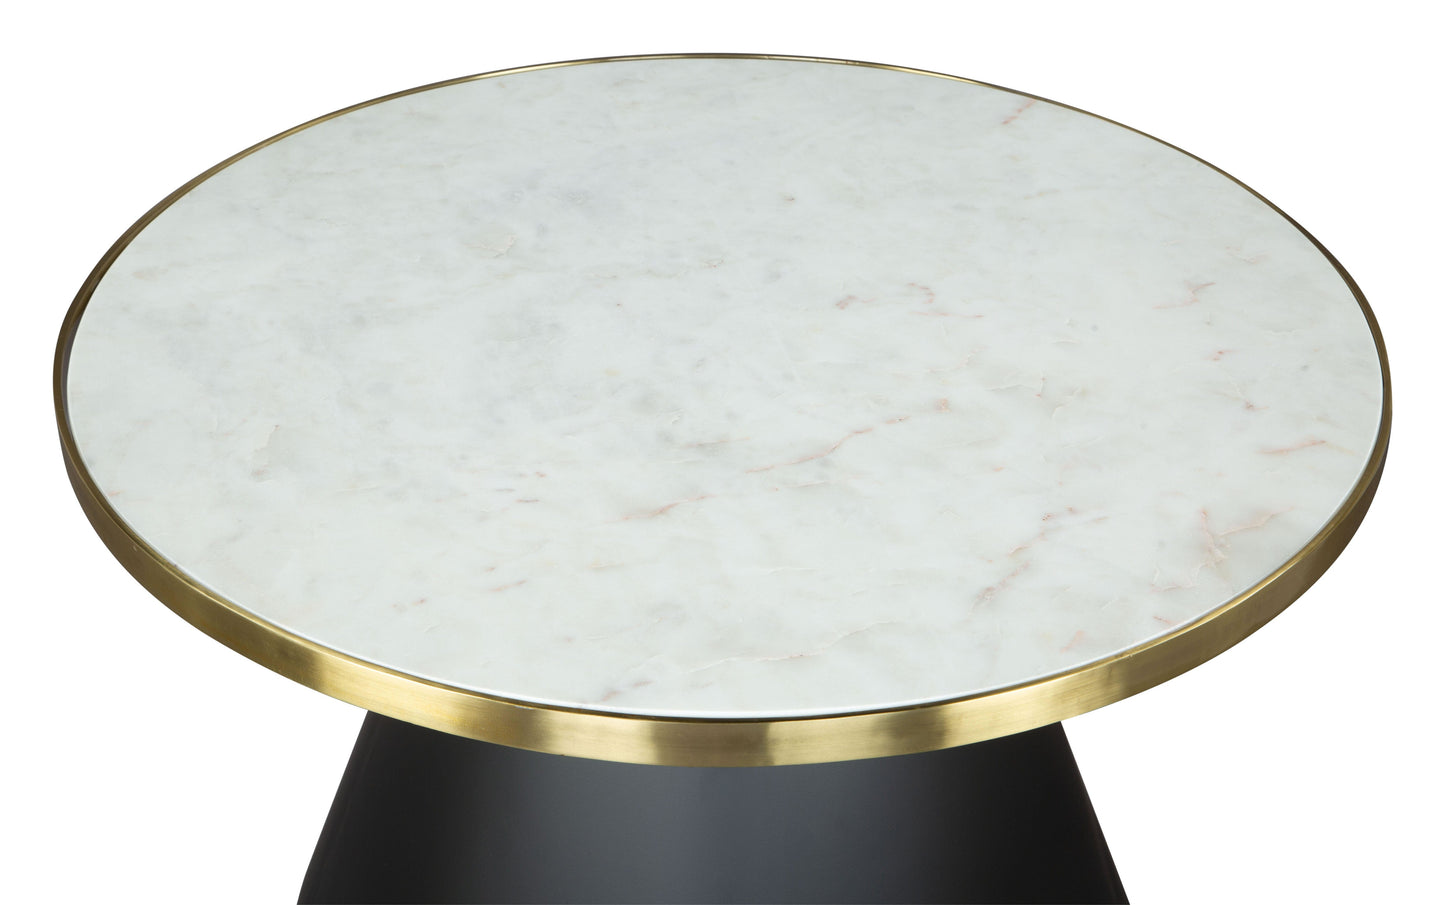 Angled view of marble top with gold rim